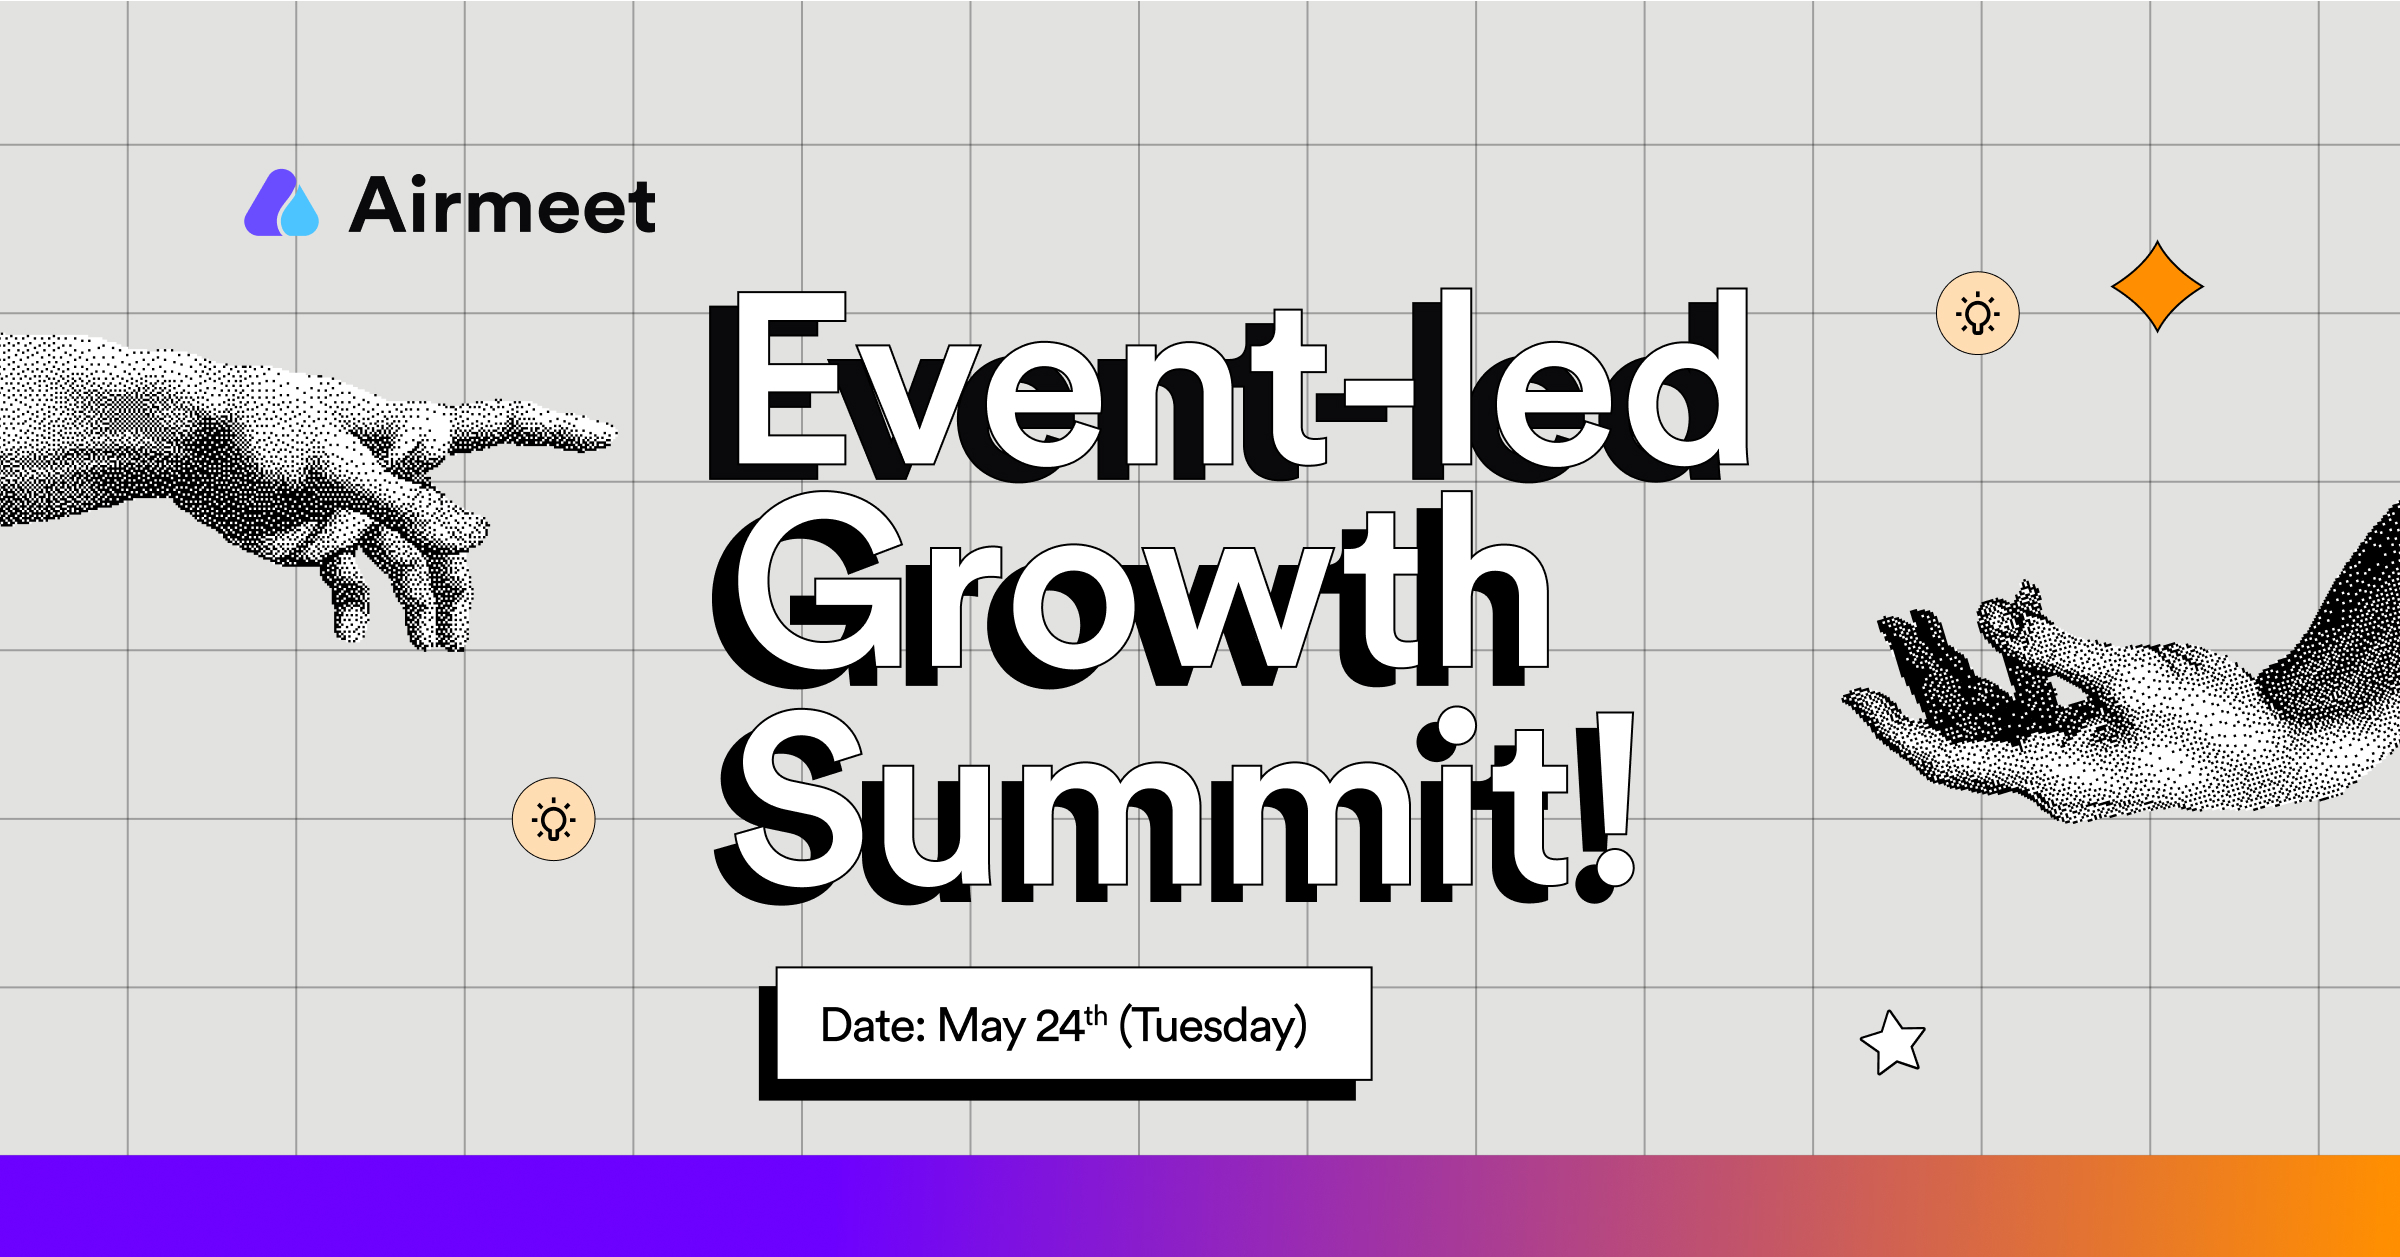 The Eventled Growth Summit Airmeet